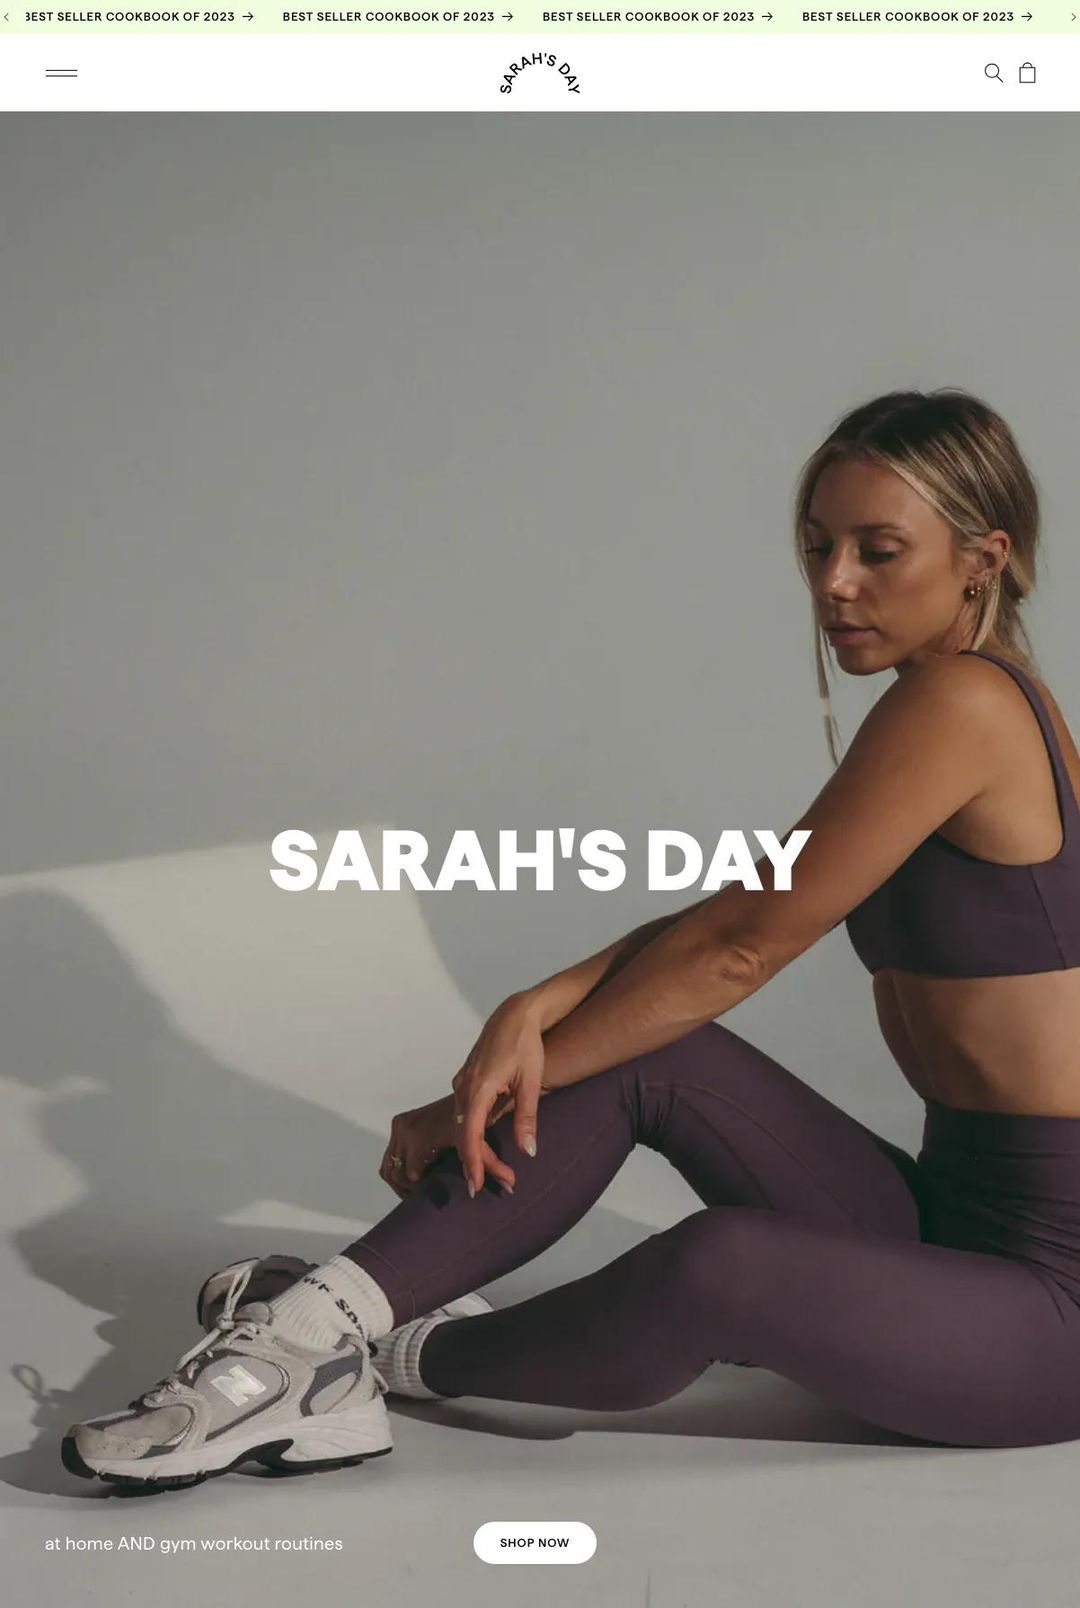 Screenshot 1 of Sarah's Day (Example Squarespace Ecommerce Website)